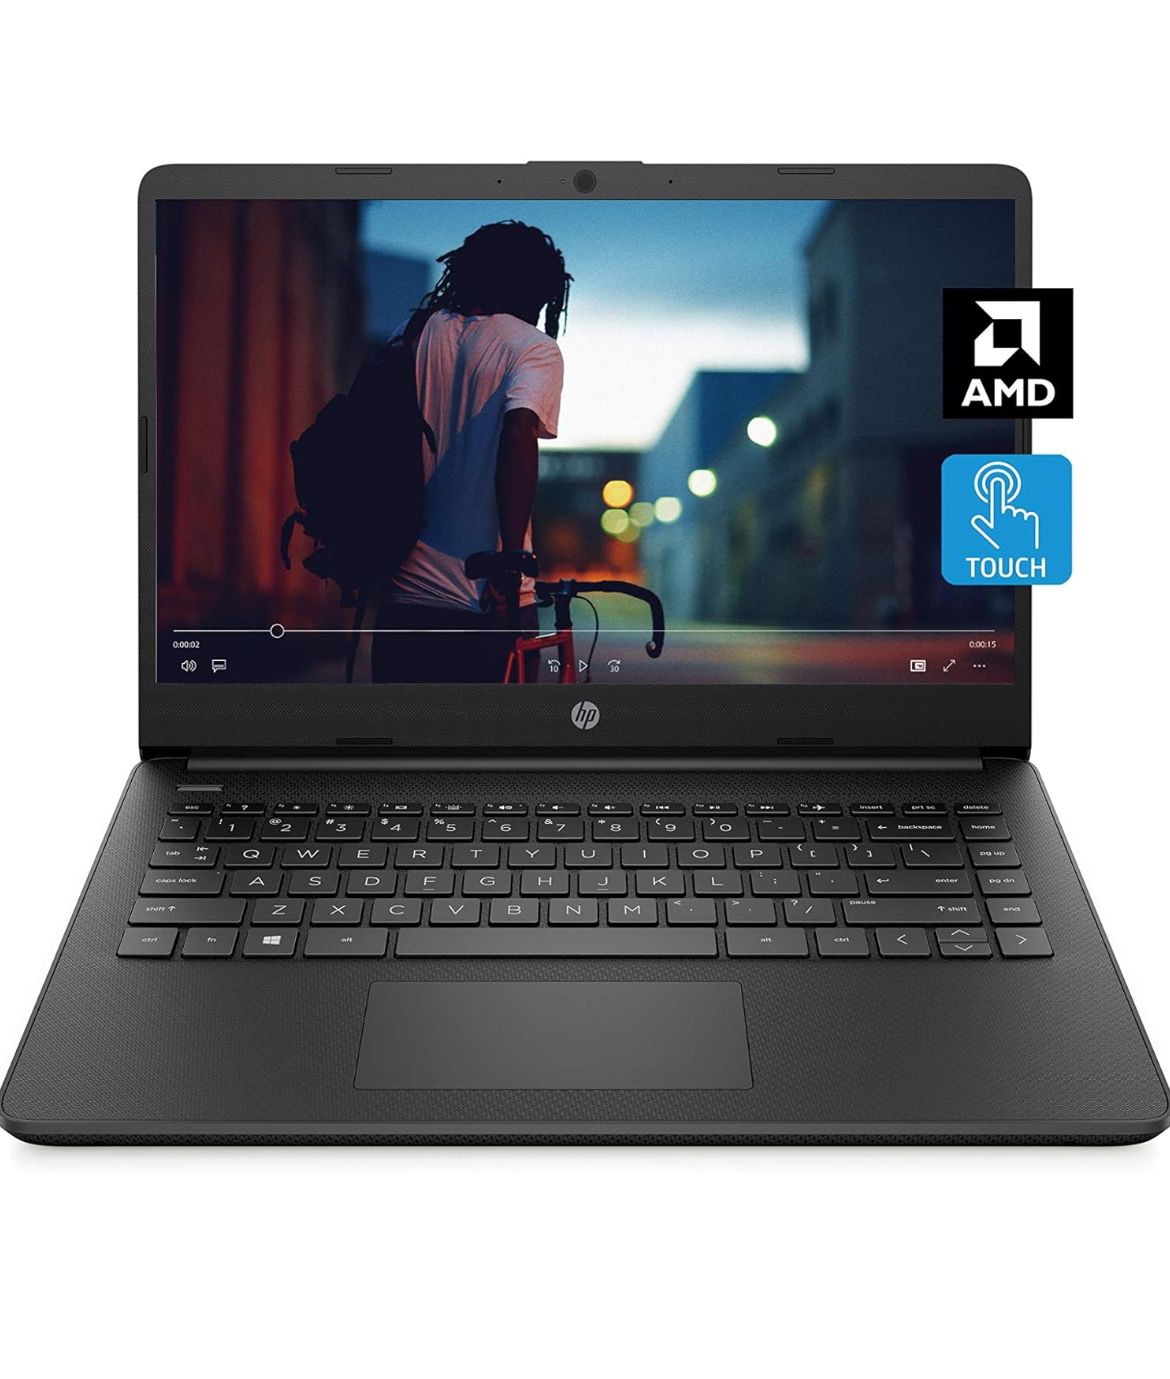 Brand New HP 14 Laptop, AMD 3020e, 14 inch HD Touchscreen with Windows 10/ 1 year Microsoft 365 Personal